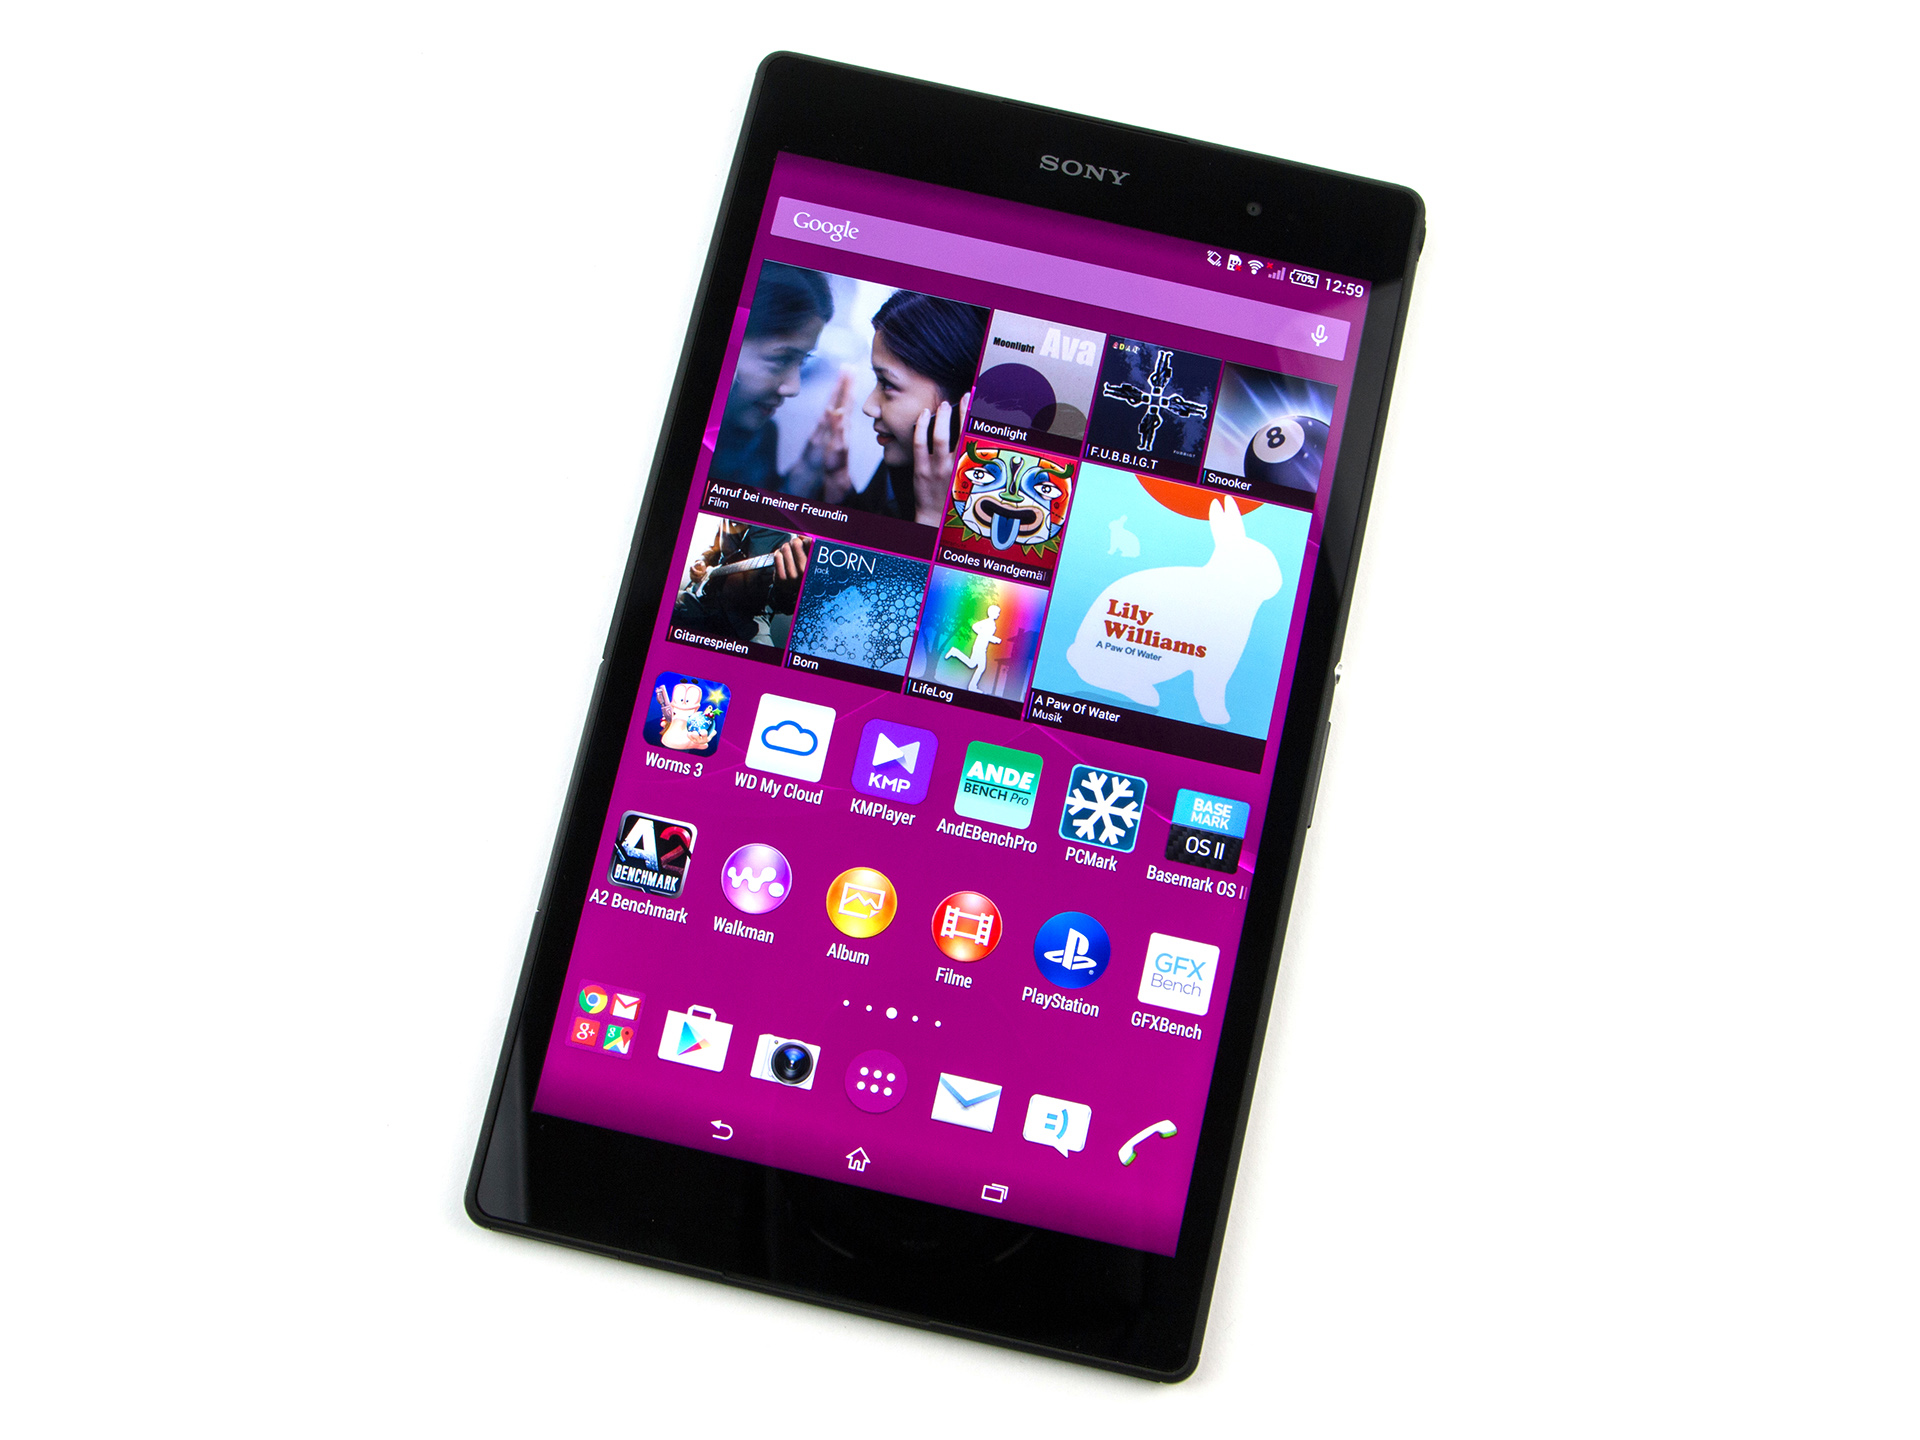 Roman Vergevingsgezind Ga terug Sony Xperia Z3 Tablet Compact - Notebookcheck.com Externe Tests